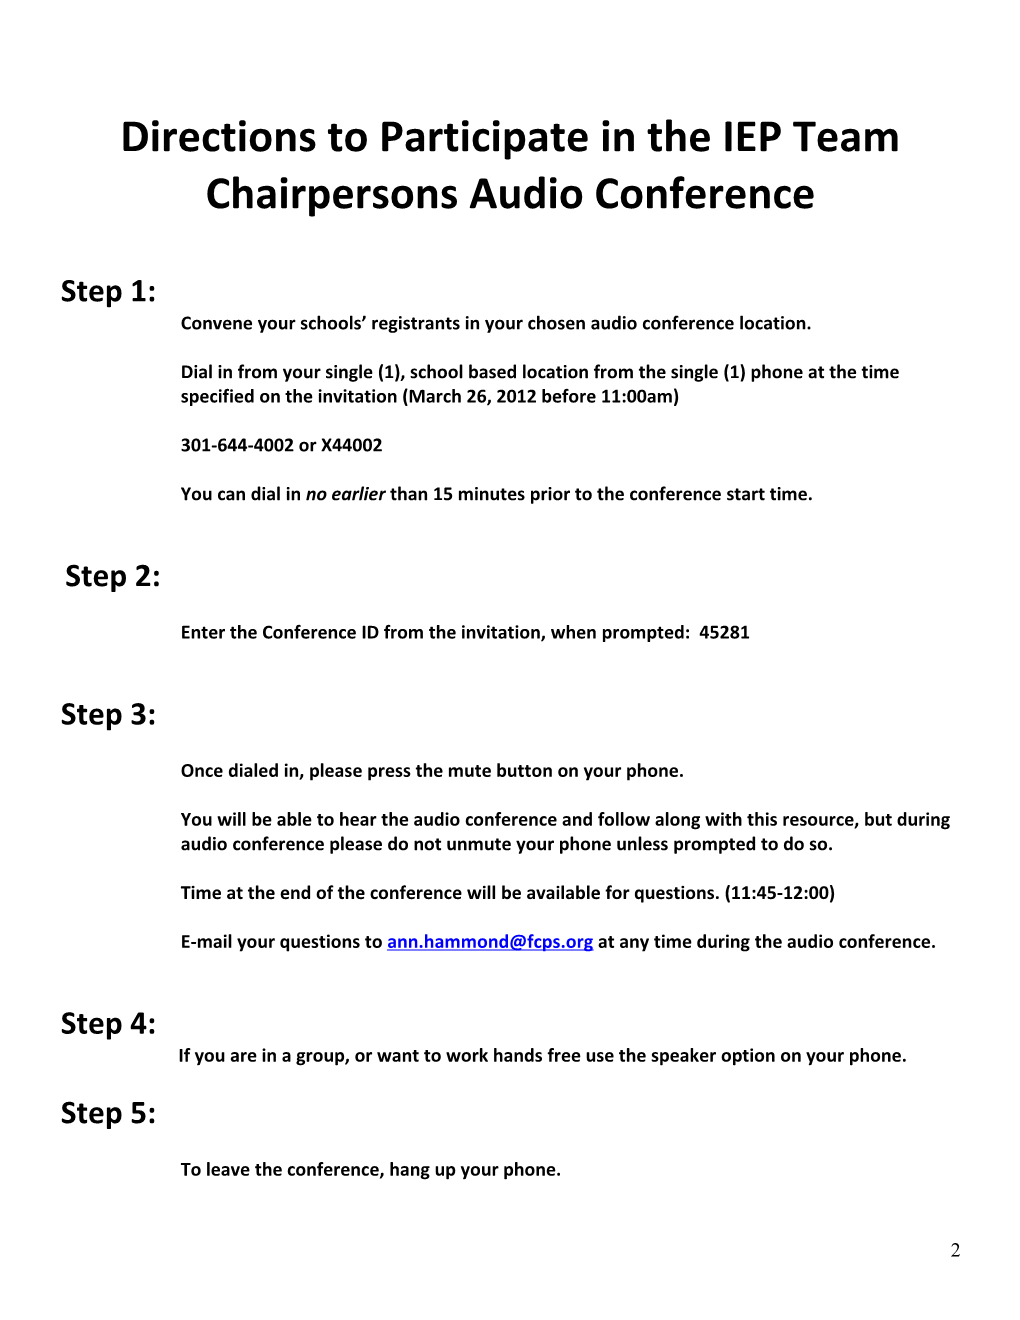 Directions to Participate in the IEP Team Chairpersons Audio Conference